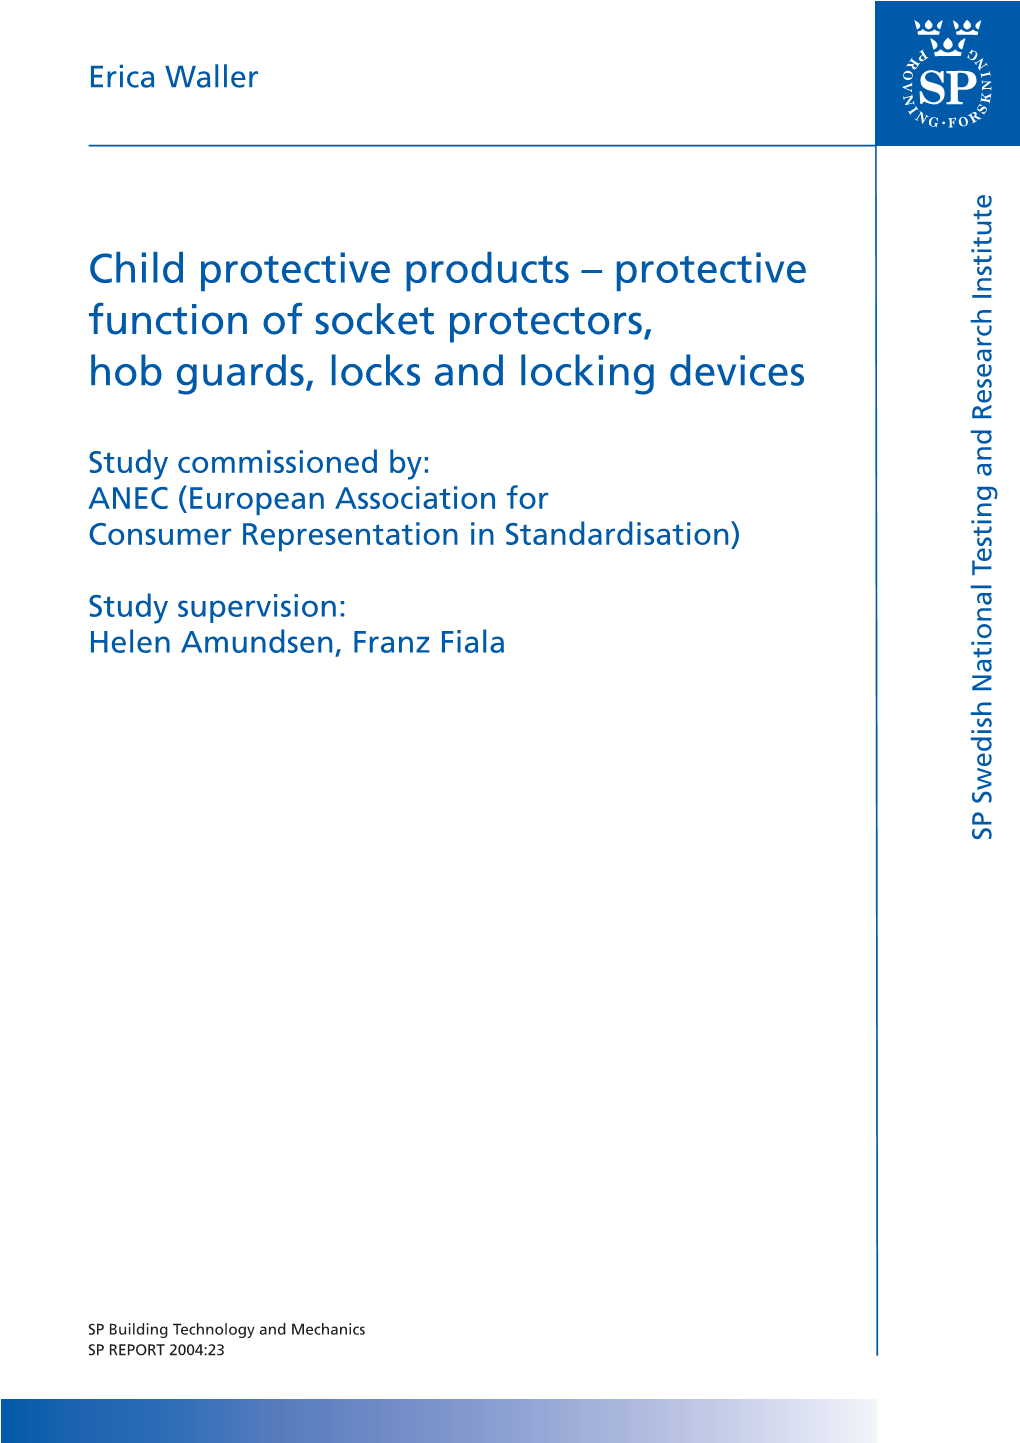 Child Protective Products – Protective Function of Socket Protectors, Hob Guards, Locks and Locking Devices